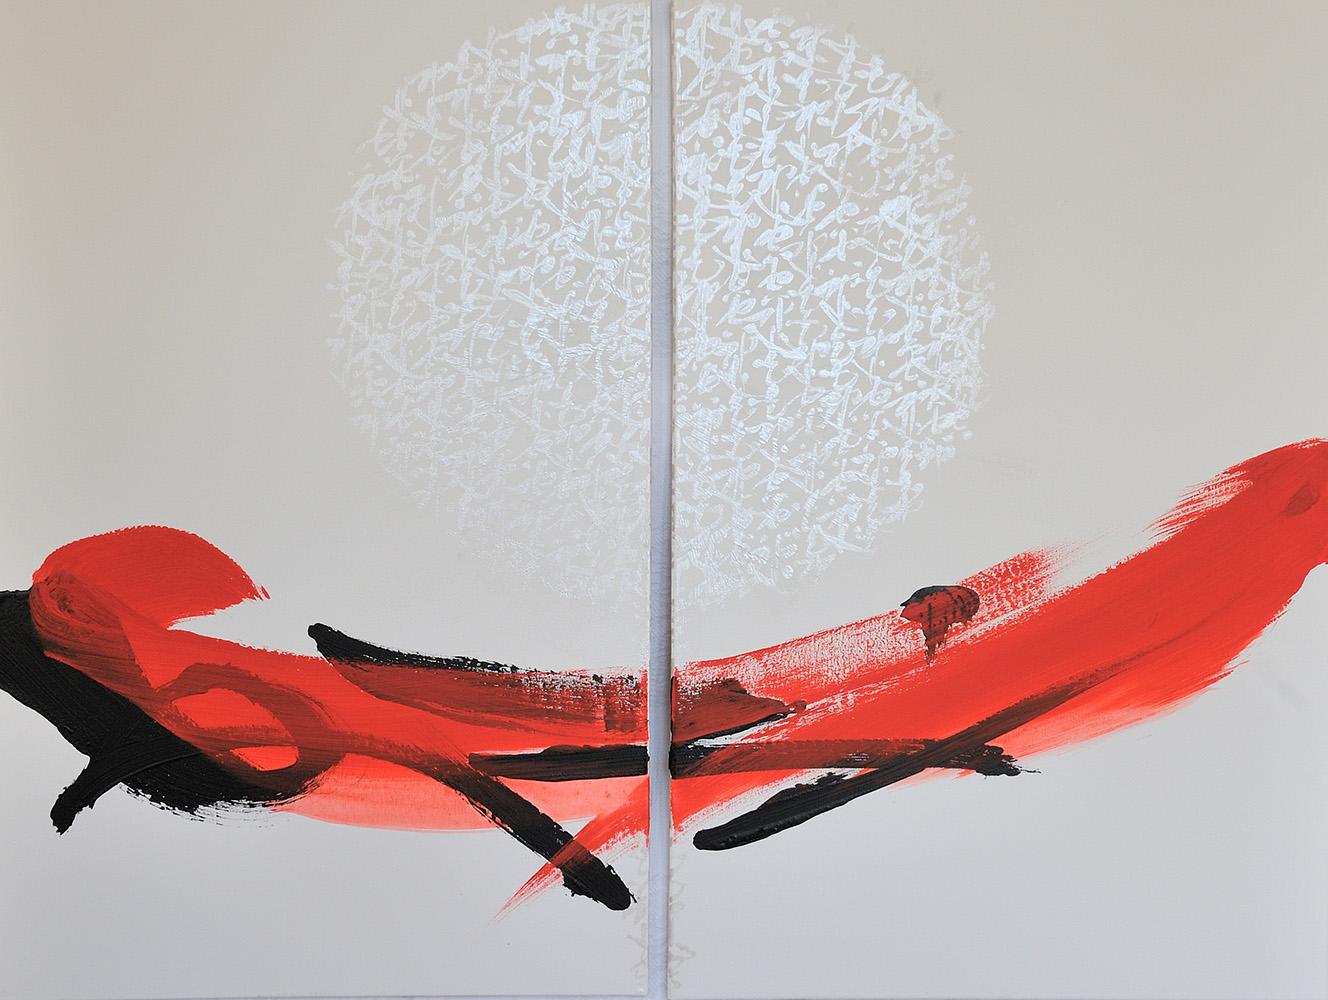 TN666-D is a unique diptych painting by Japanese contemporary artist Hachiro Kanno. The painting is made with ink and acrylic on canvas, dimensions are 100 × 130 cm (39.4 × 51.2 in). This diptych artwork is composed of two paintings each measuring: